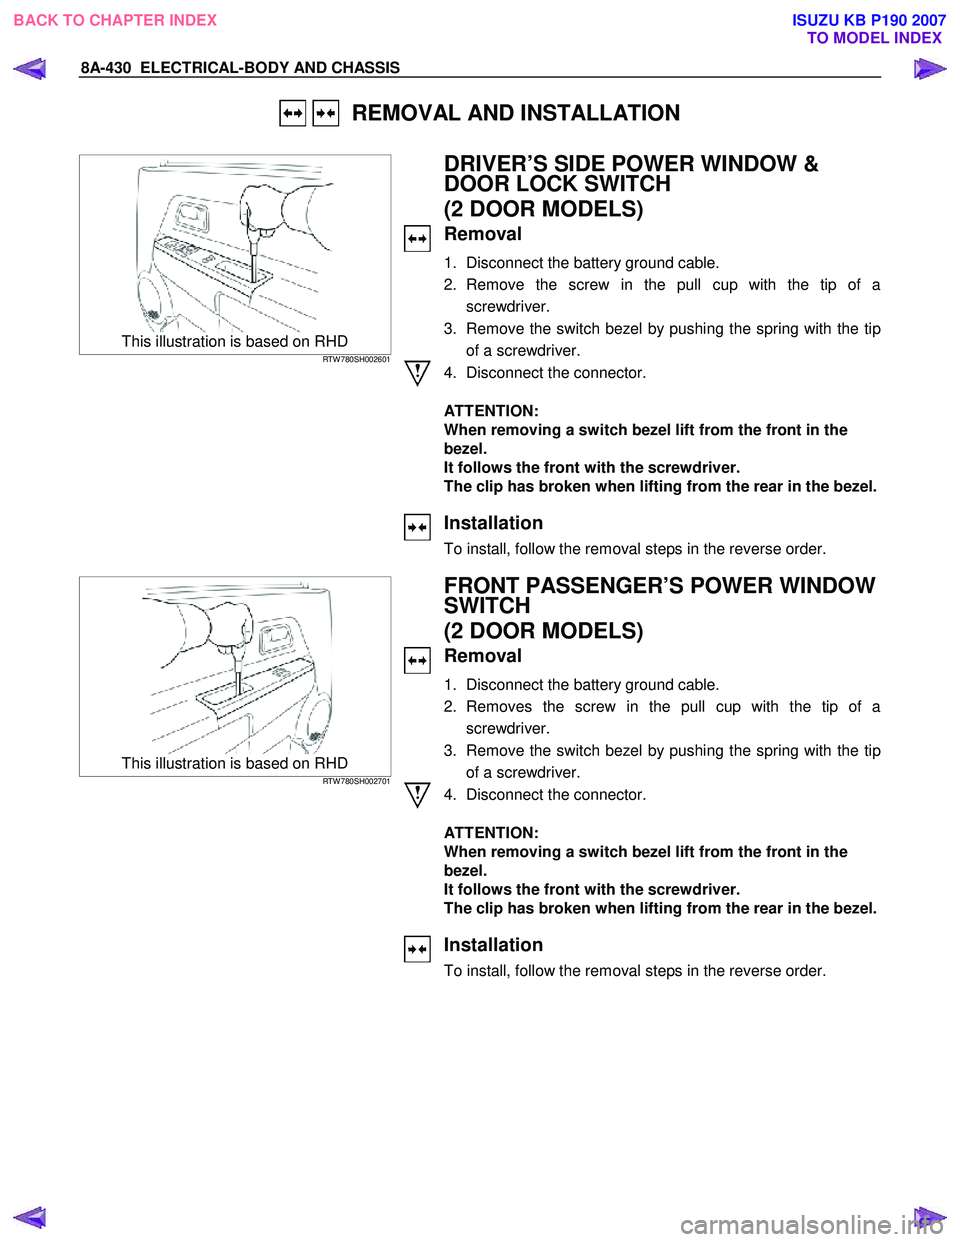 ISUZU KB P190 2007  Workshop Owners Manual 8A-430  ELECTRICAL-BODY AND CHASSIS 
   REMOVAL AND INSTALLATION 
 
  
 This illustration is based on RHD RTW 780SH002601  
  
 
 
  
  
 
DRIVER’S SIDE POWER WINDOW &  
DOOR LOCK SWITCH  
(2 DOOR M